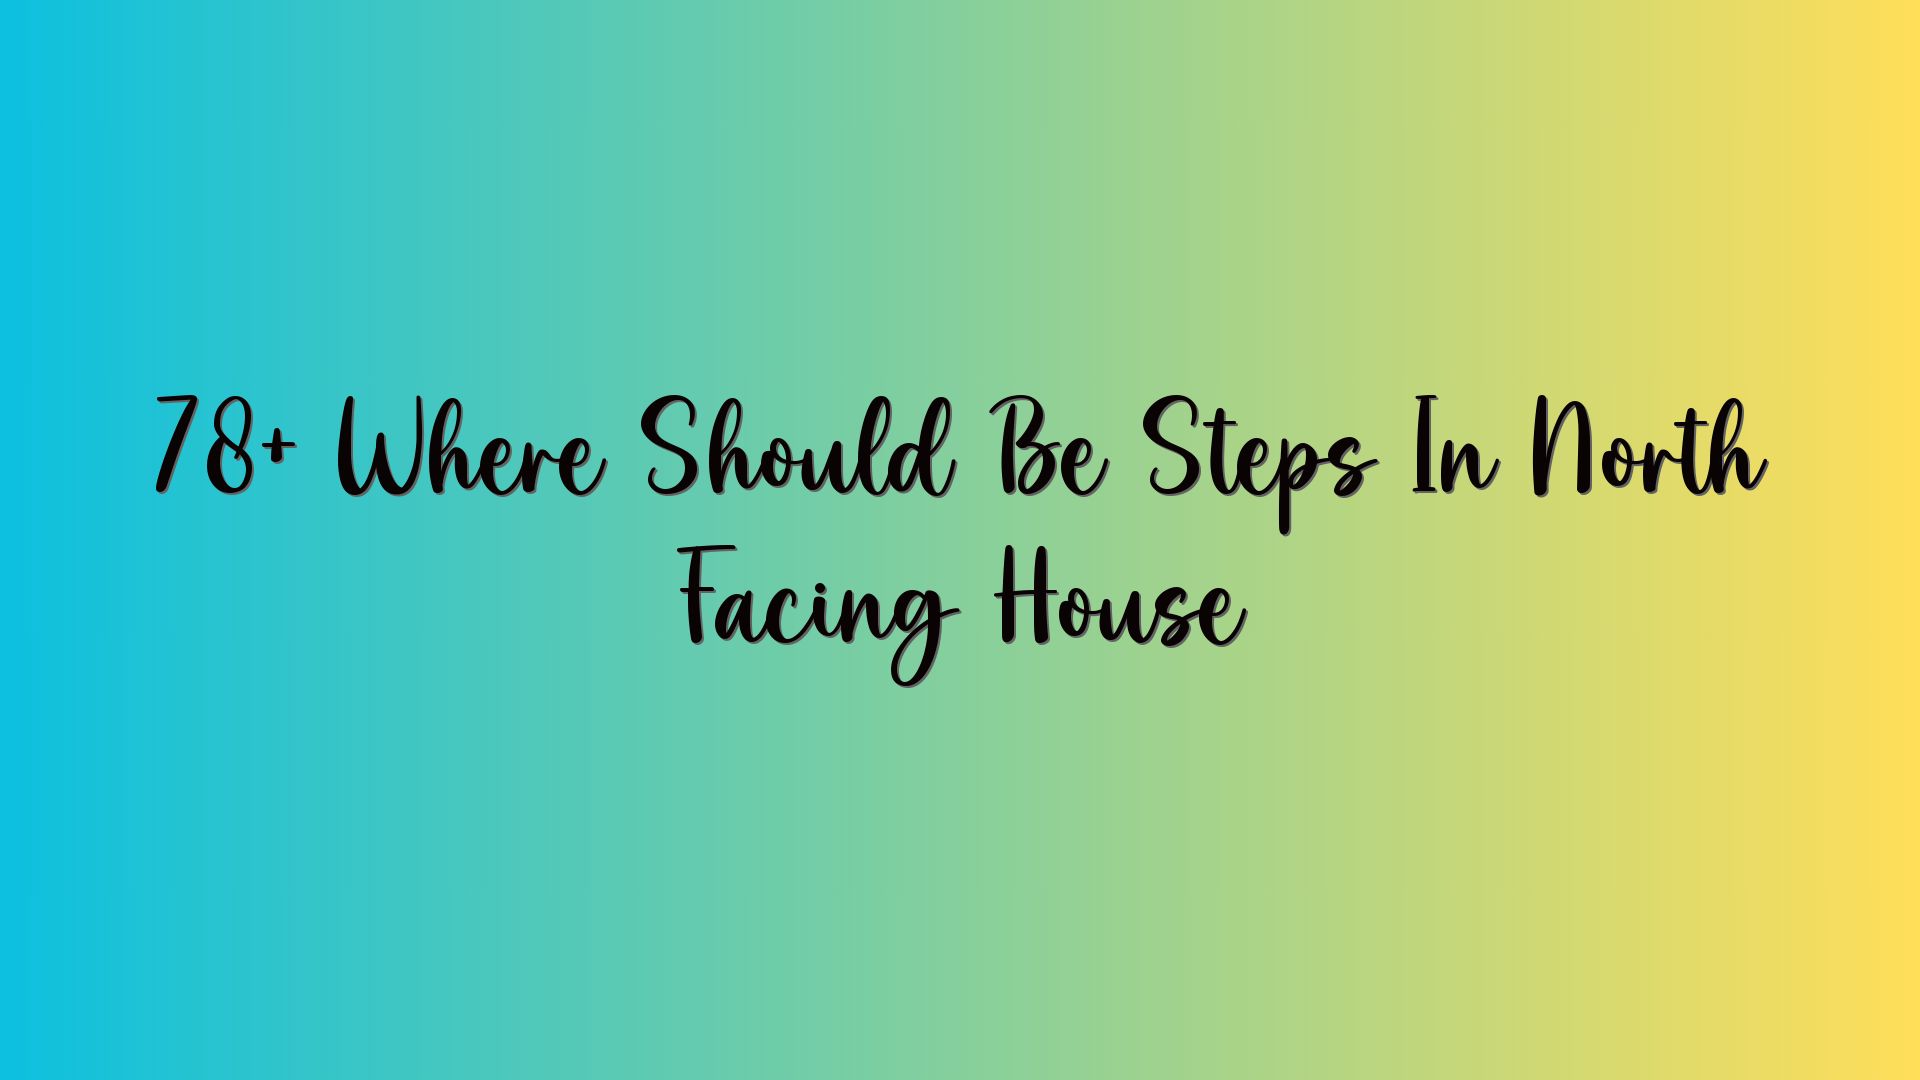 78+ Where Should Be Steps In North Facing House